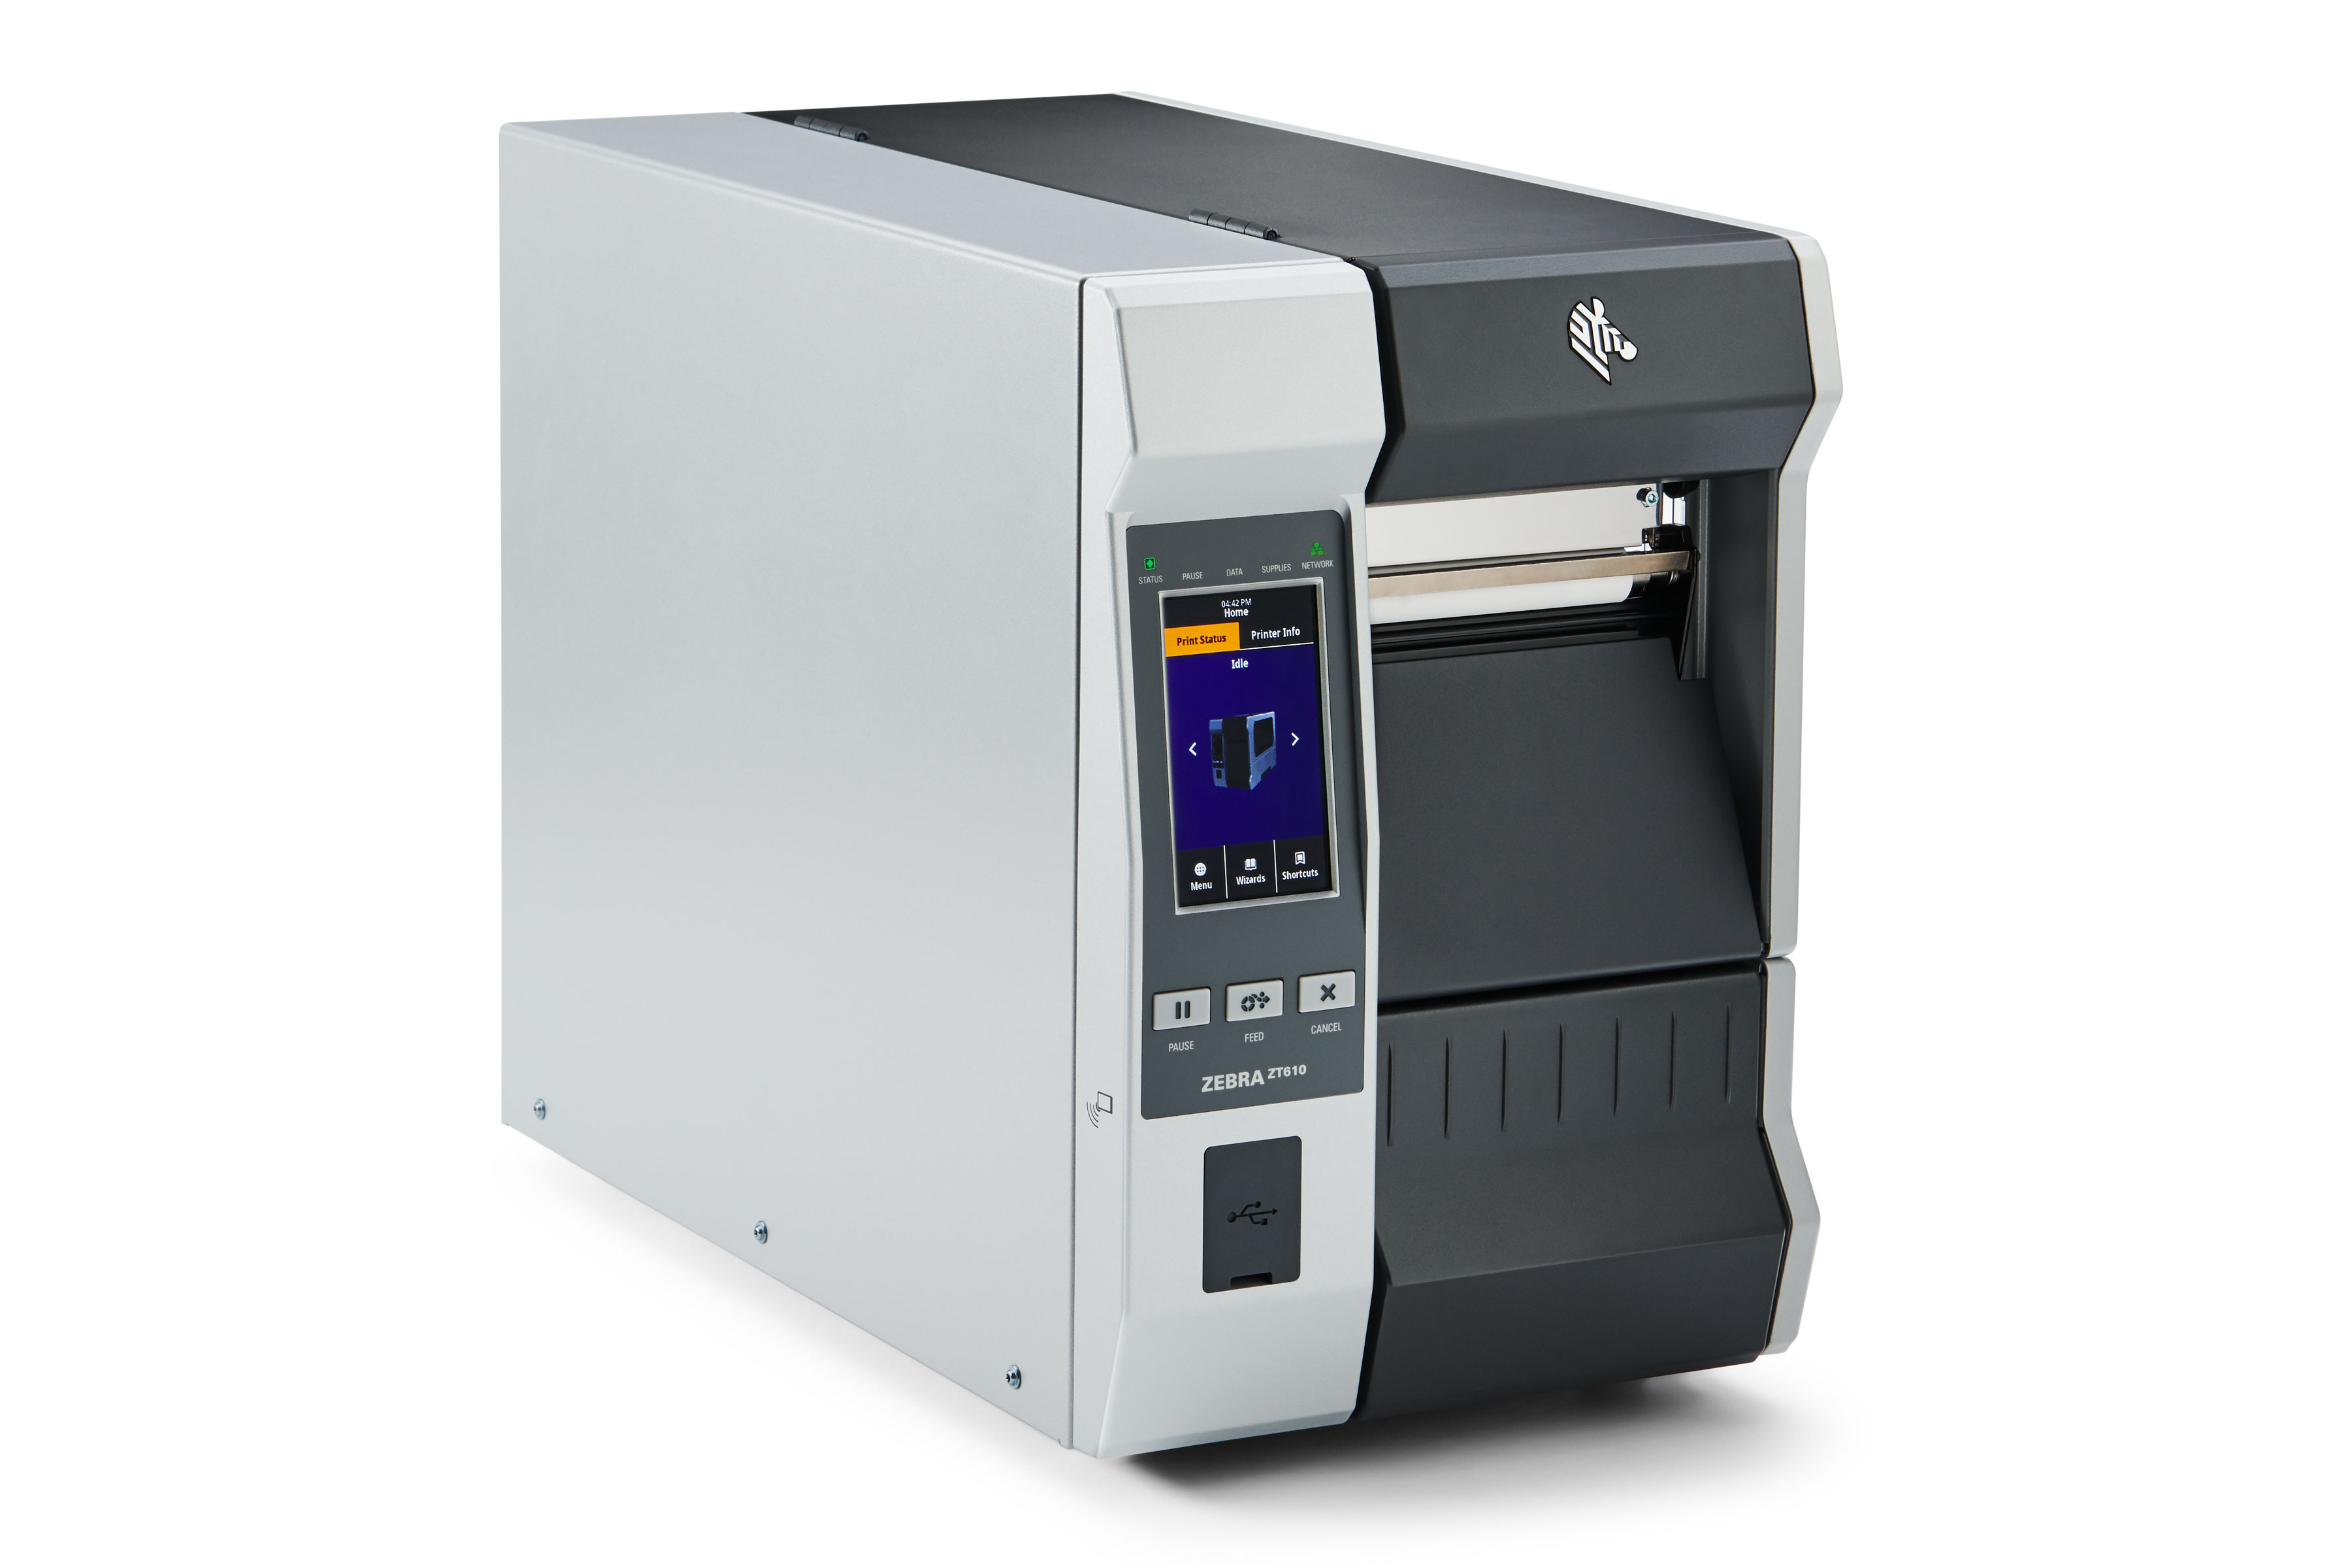 Label printer - All industrial manufacturers